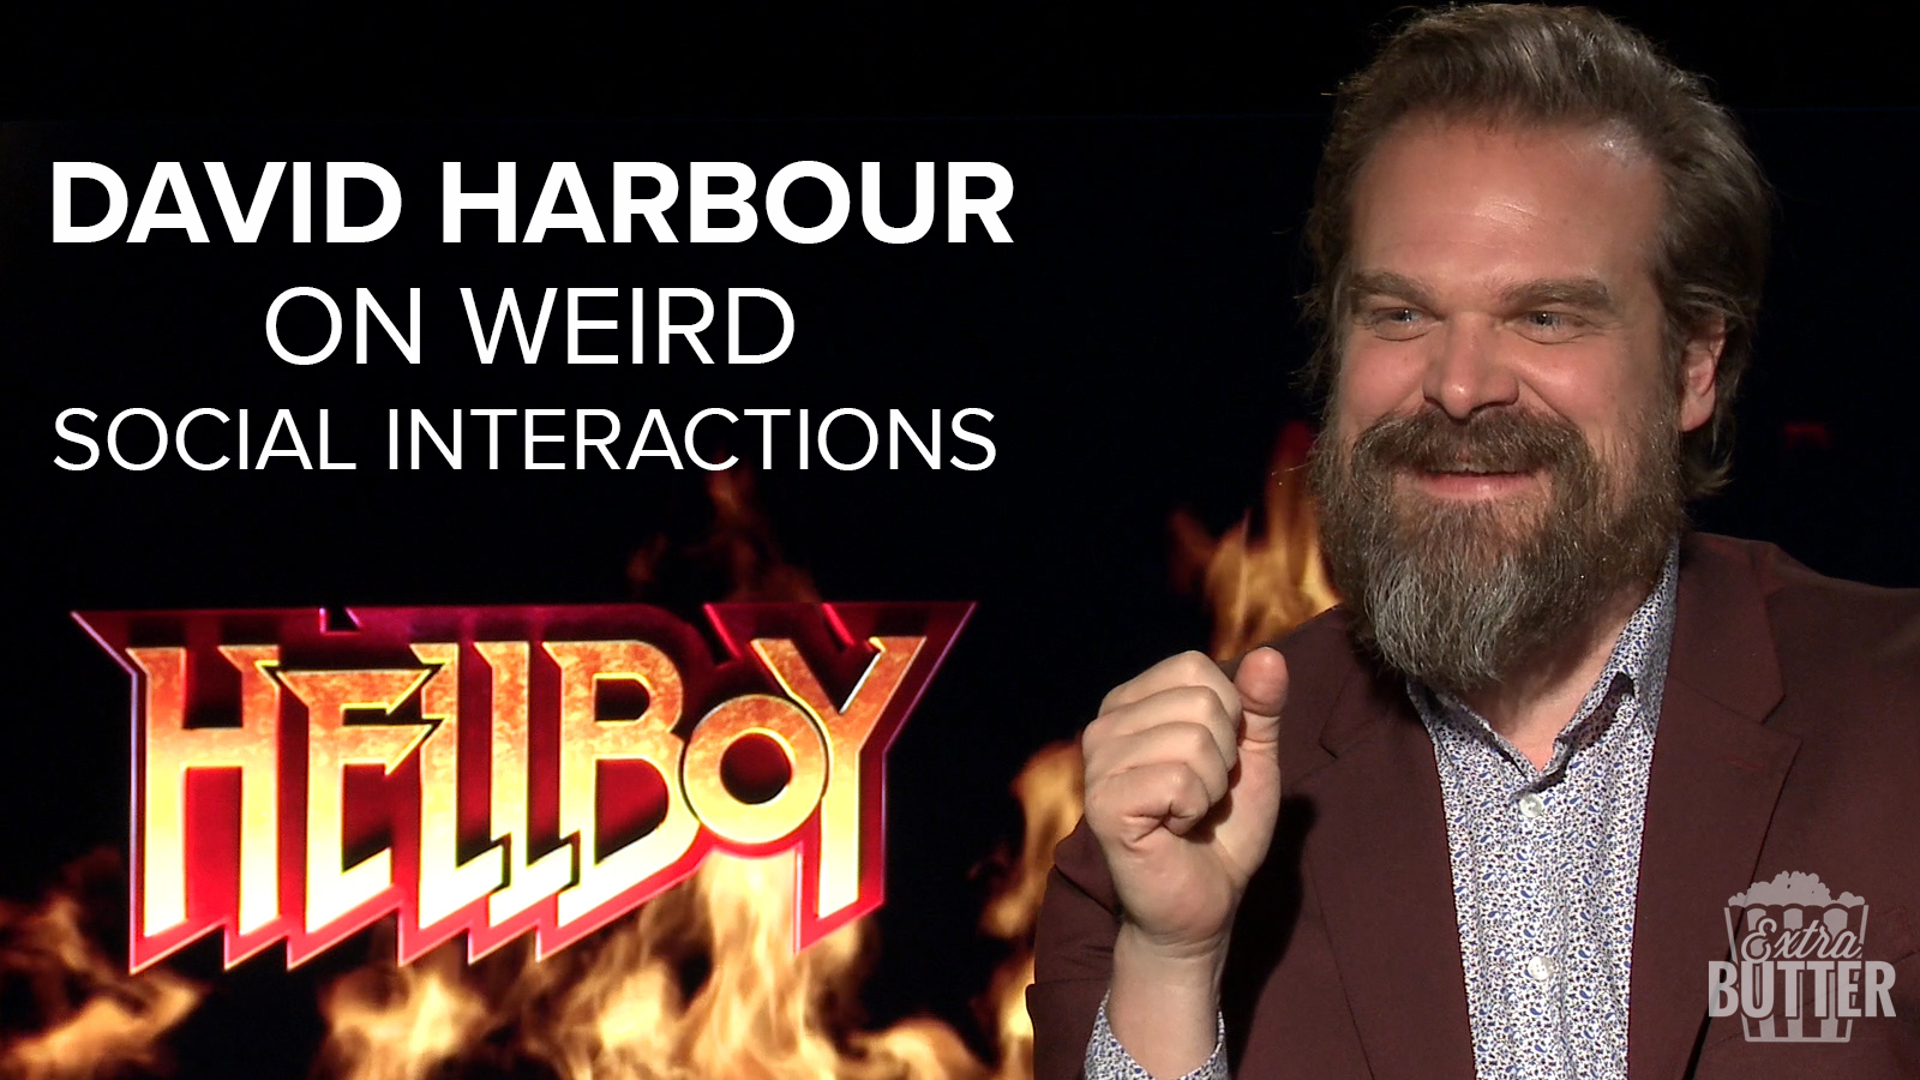 David Harbour sits down to talk about the new version of 'Hellboy.' But before the interview can get going, Mark S. Allen gives David an awkward handshake which leads to an awkward interview. Interview arranged by Summit Entertainment.